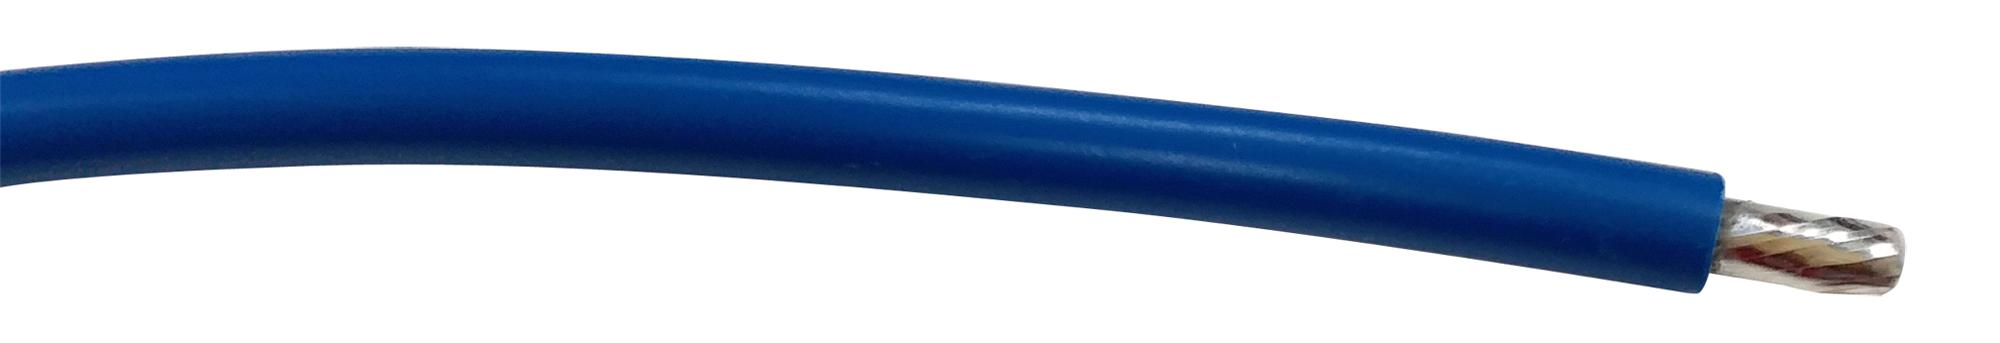 PP002528 CABLE WIRE, 20AWG, BLUE, 305M PRO POWER